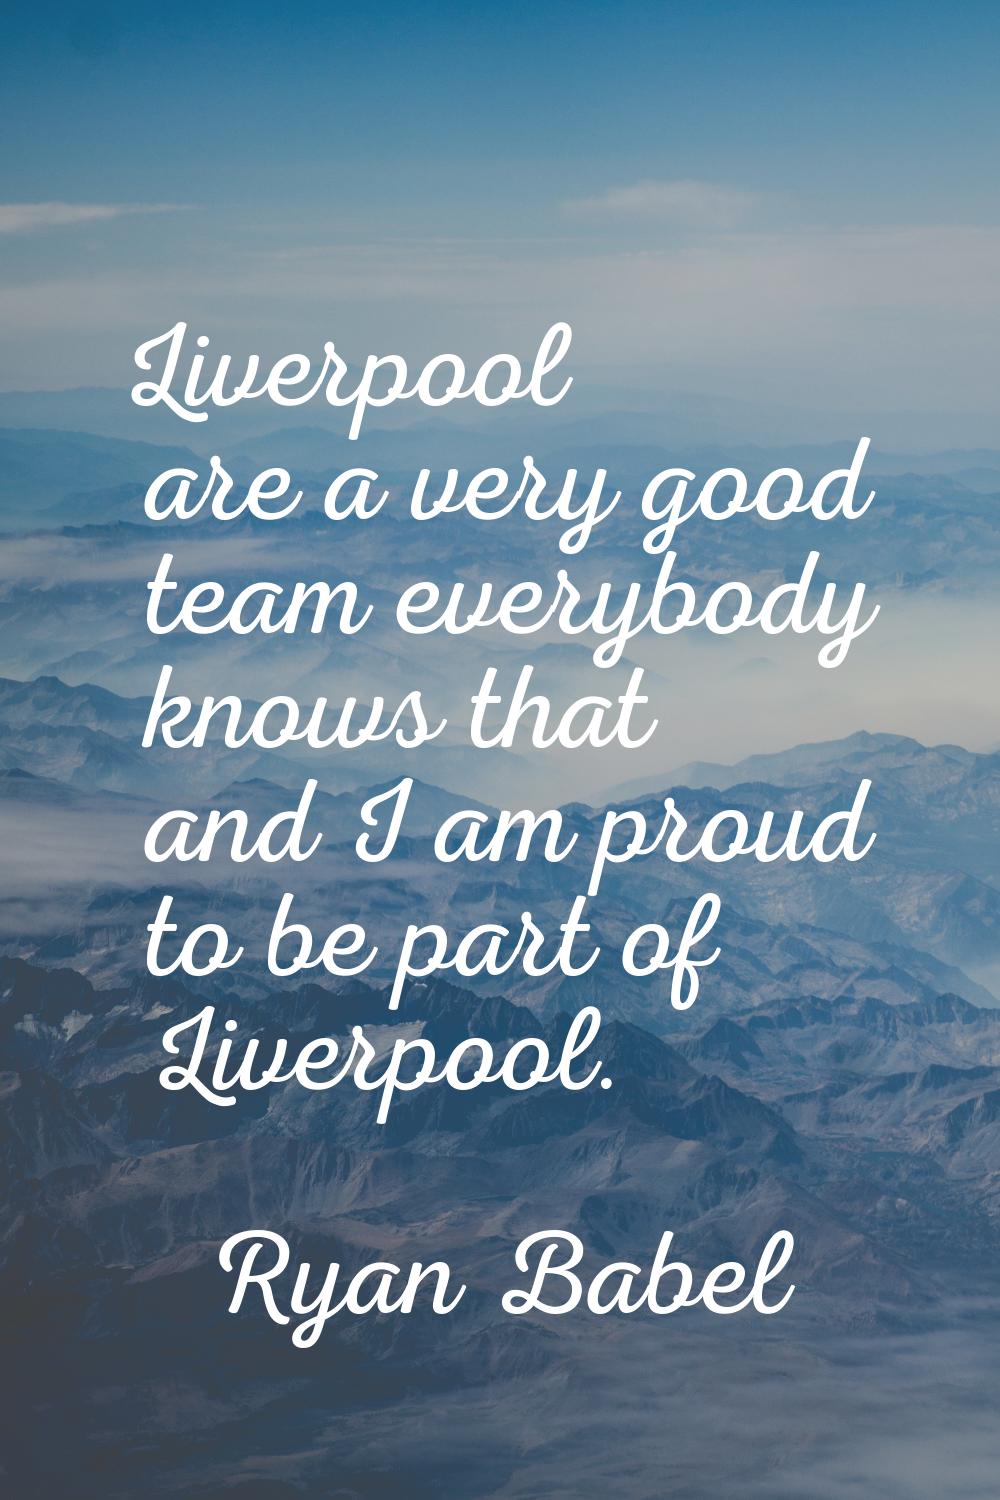 Liverpool are a very good team everybody knows that and I am proud to be part of Liverpool.